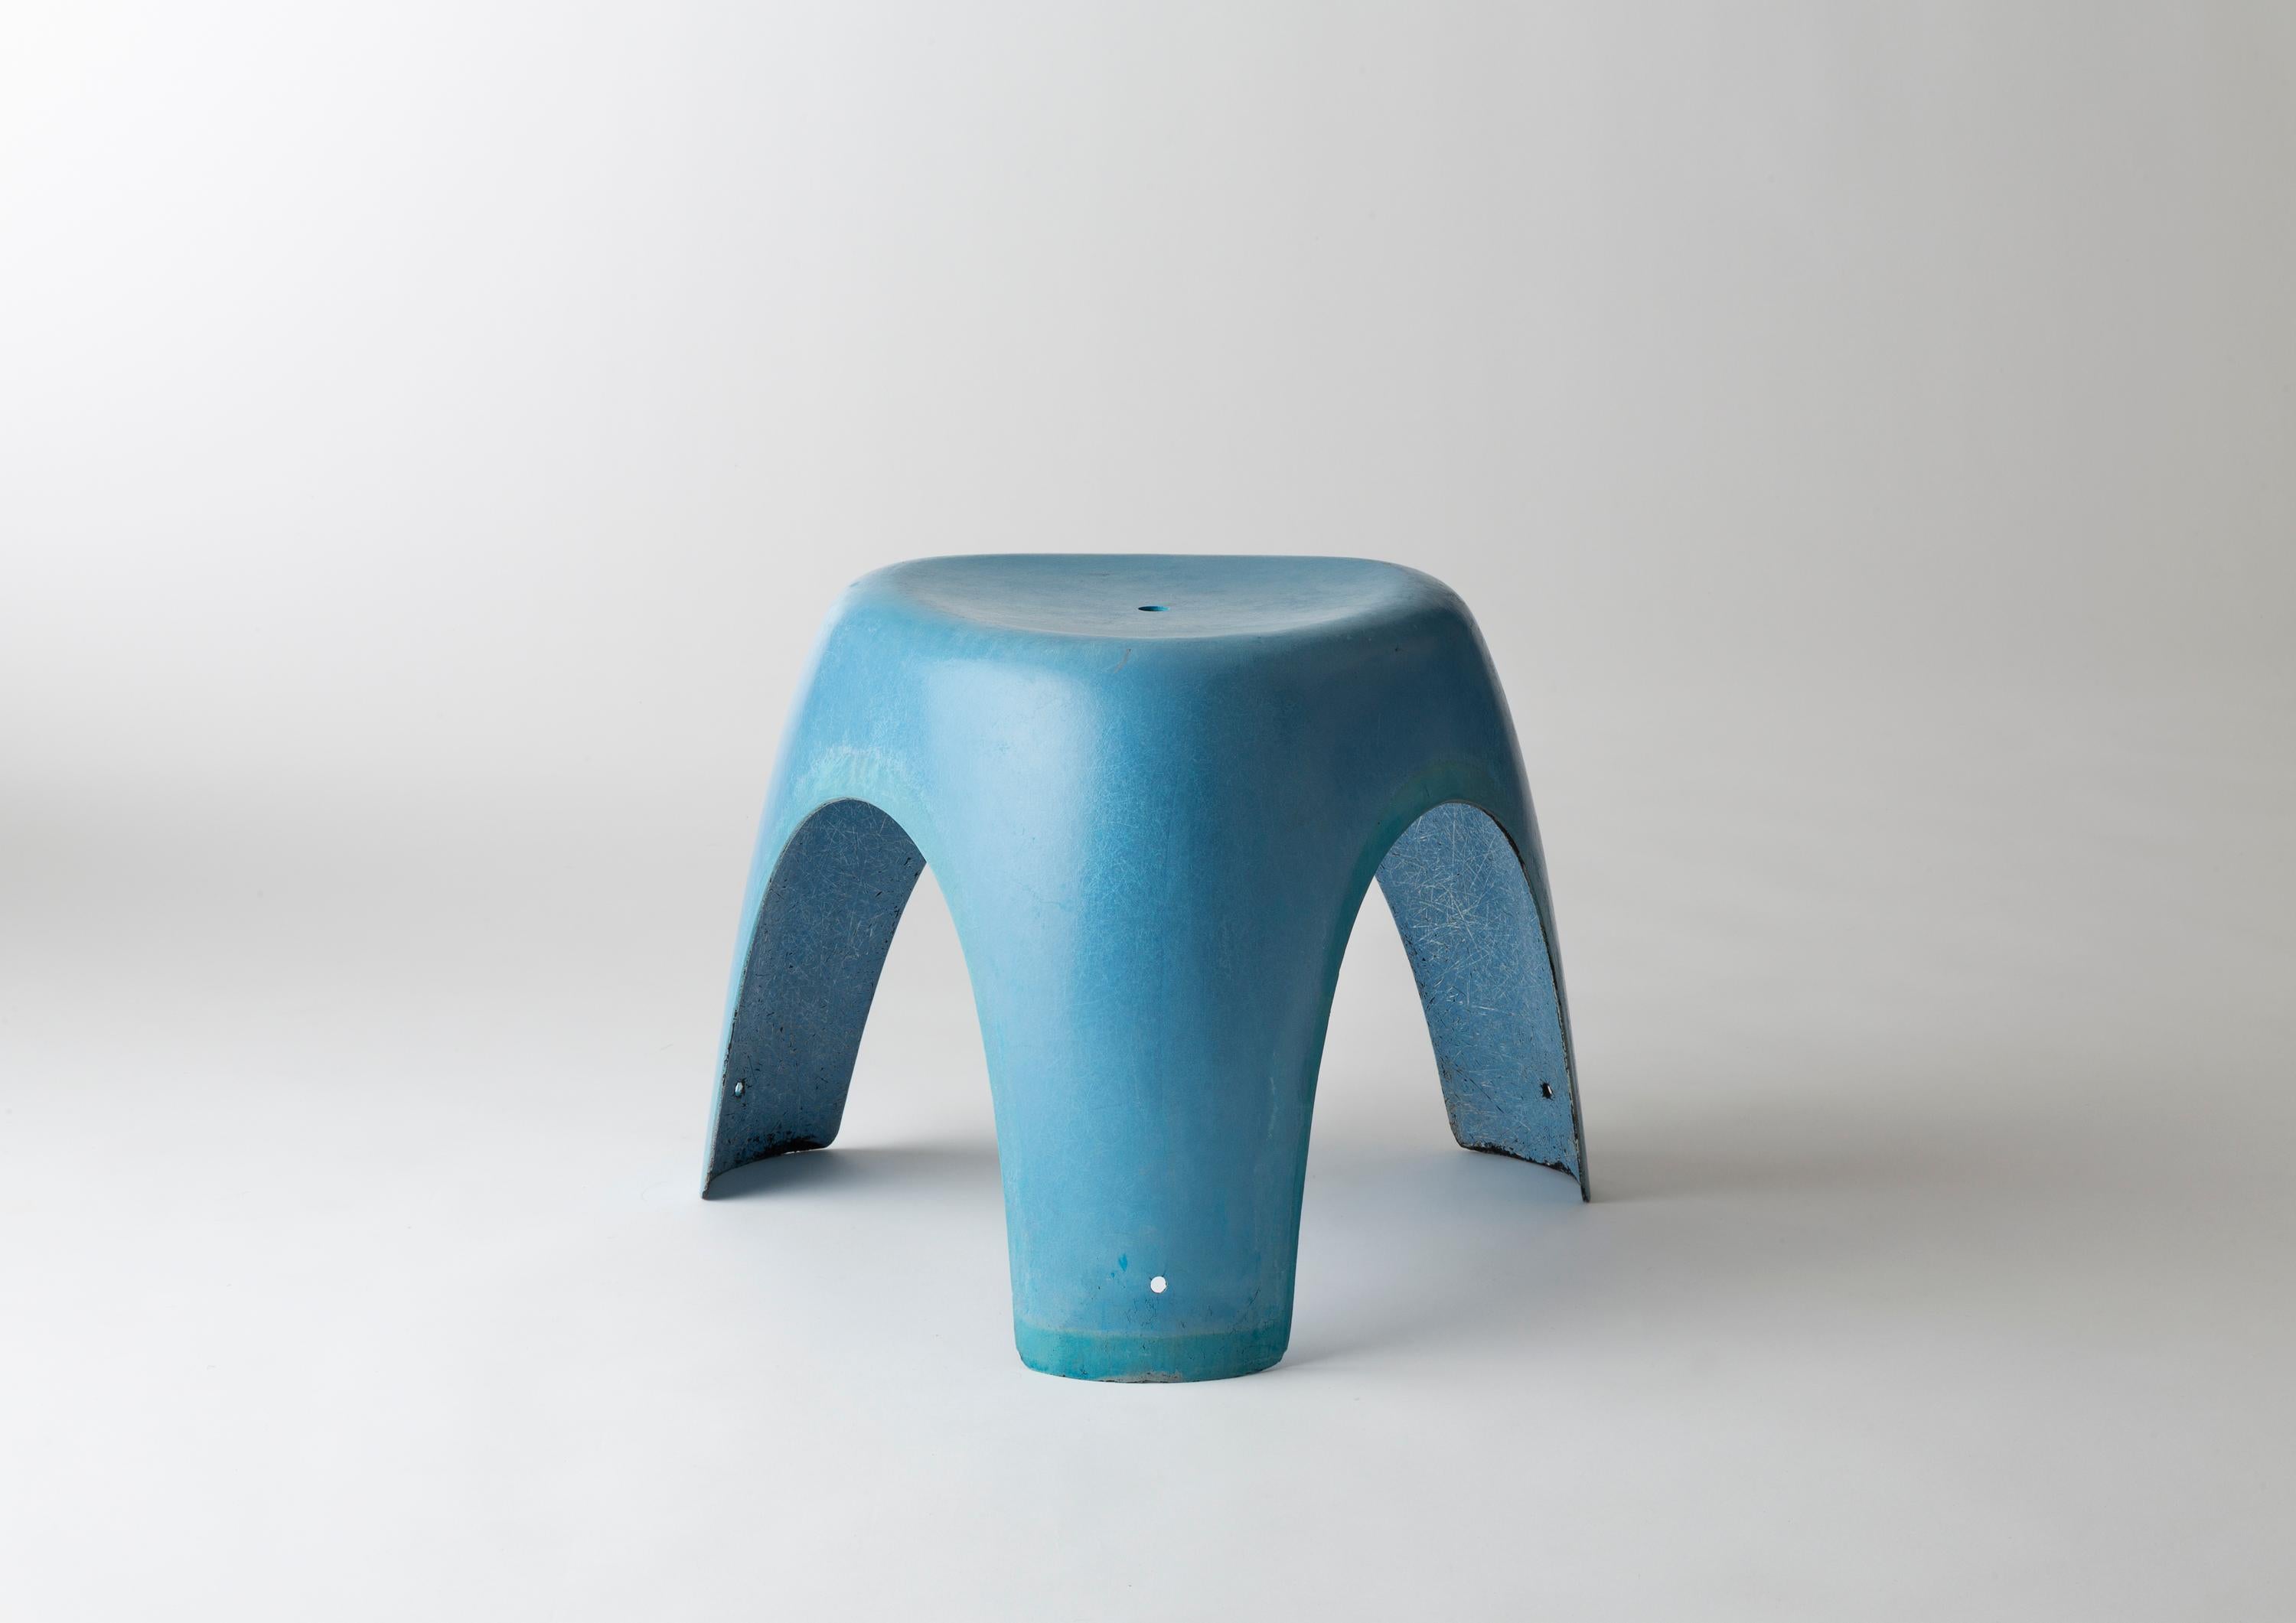 An Elephant stool by Sori Yanagi in blue fiberglass, manufactured by Kotobuki Seating Company, Tokyo, Japan, engraved with the editor’s mark and designer’s one under the seat, model designed in 1954.